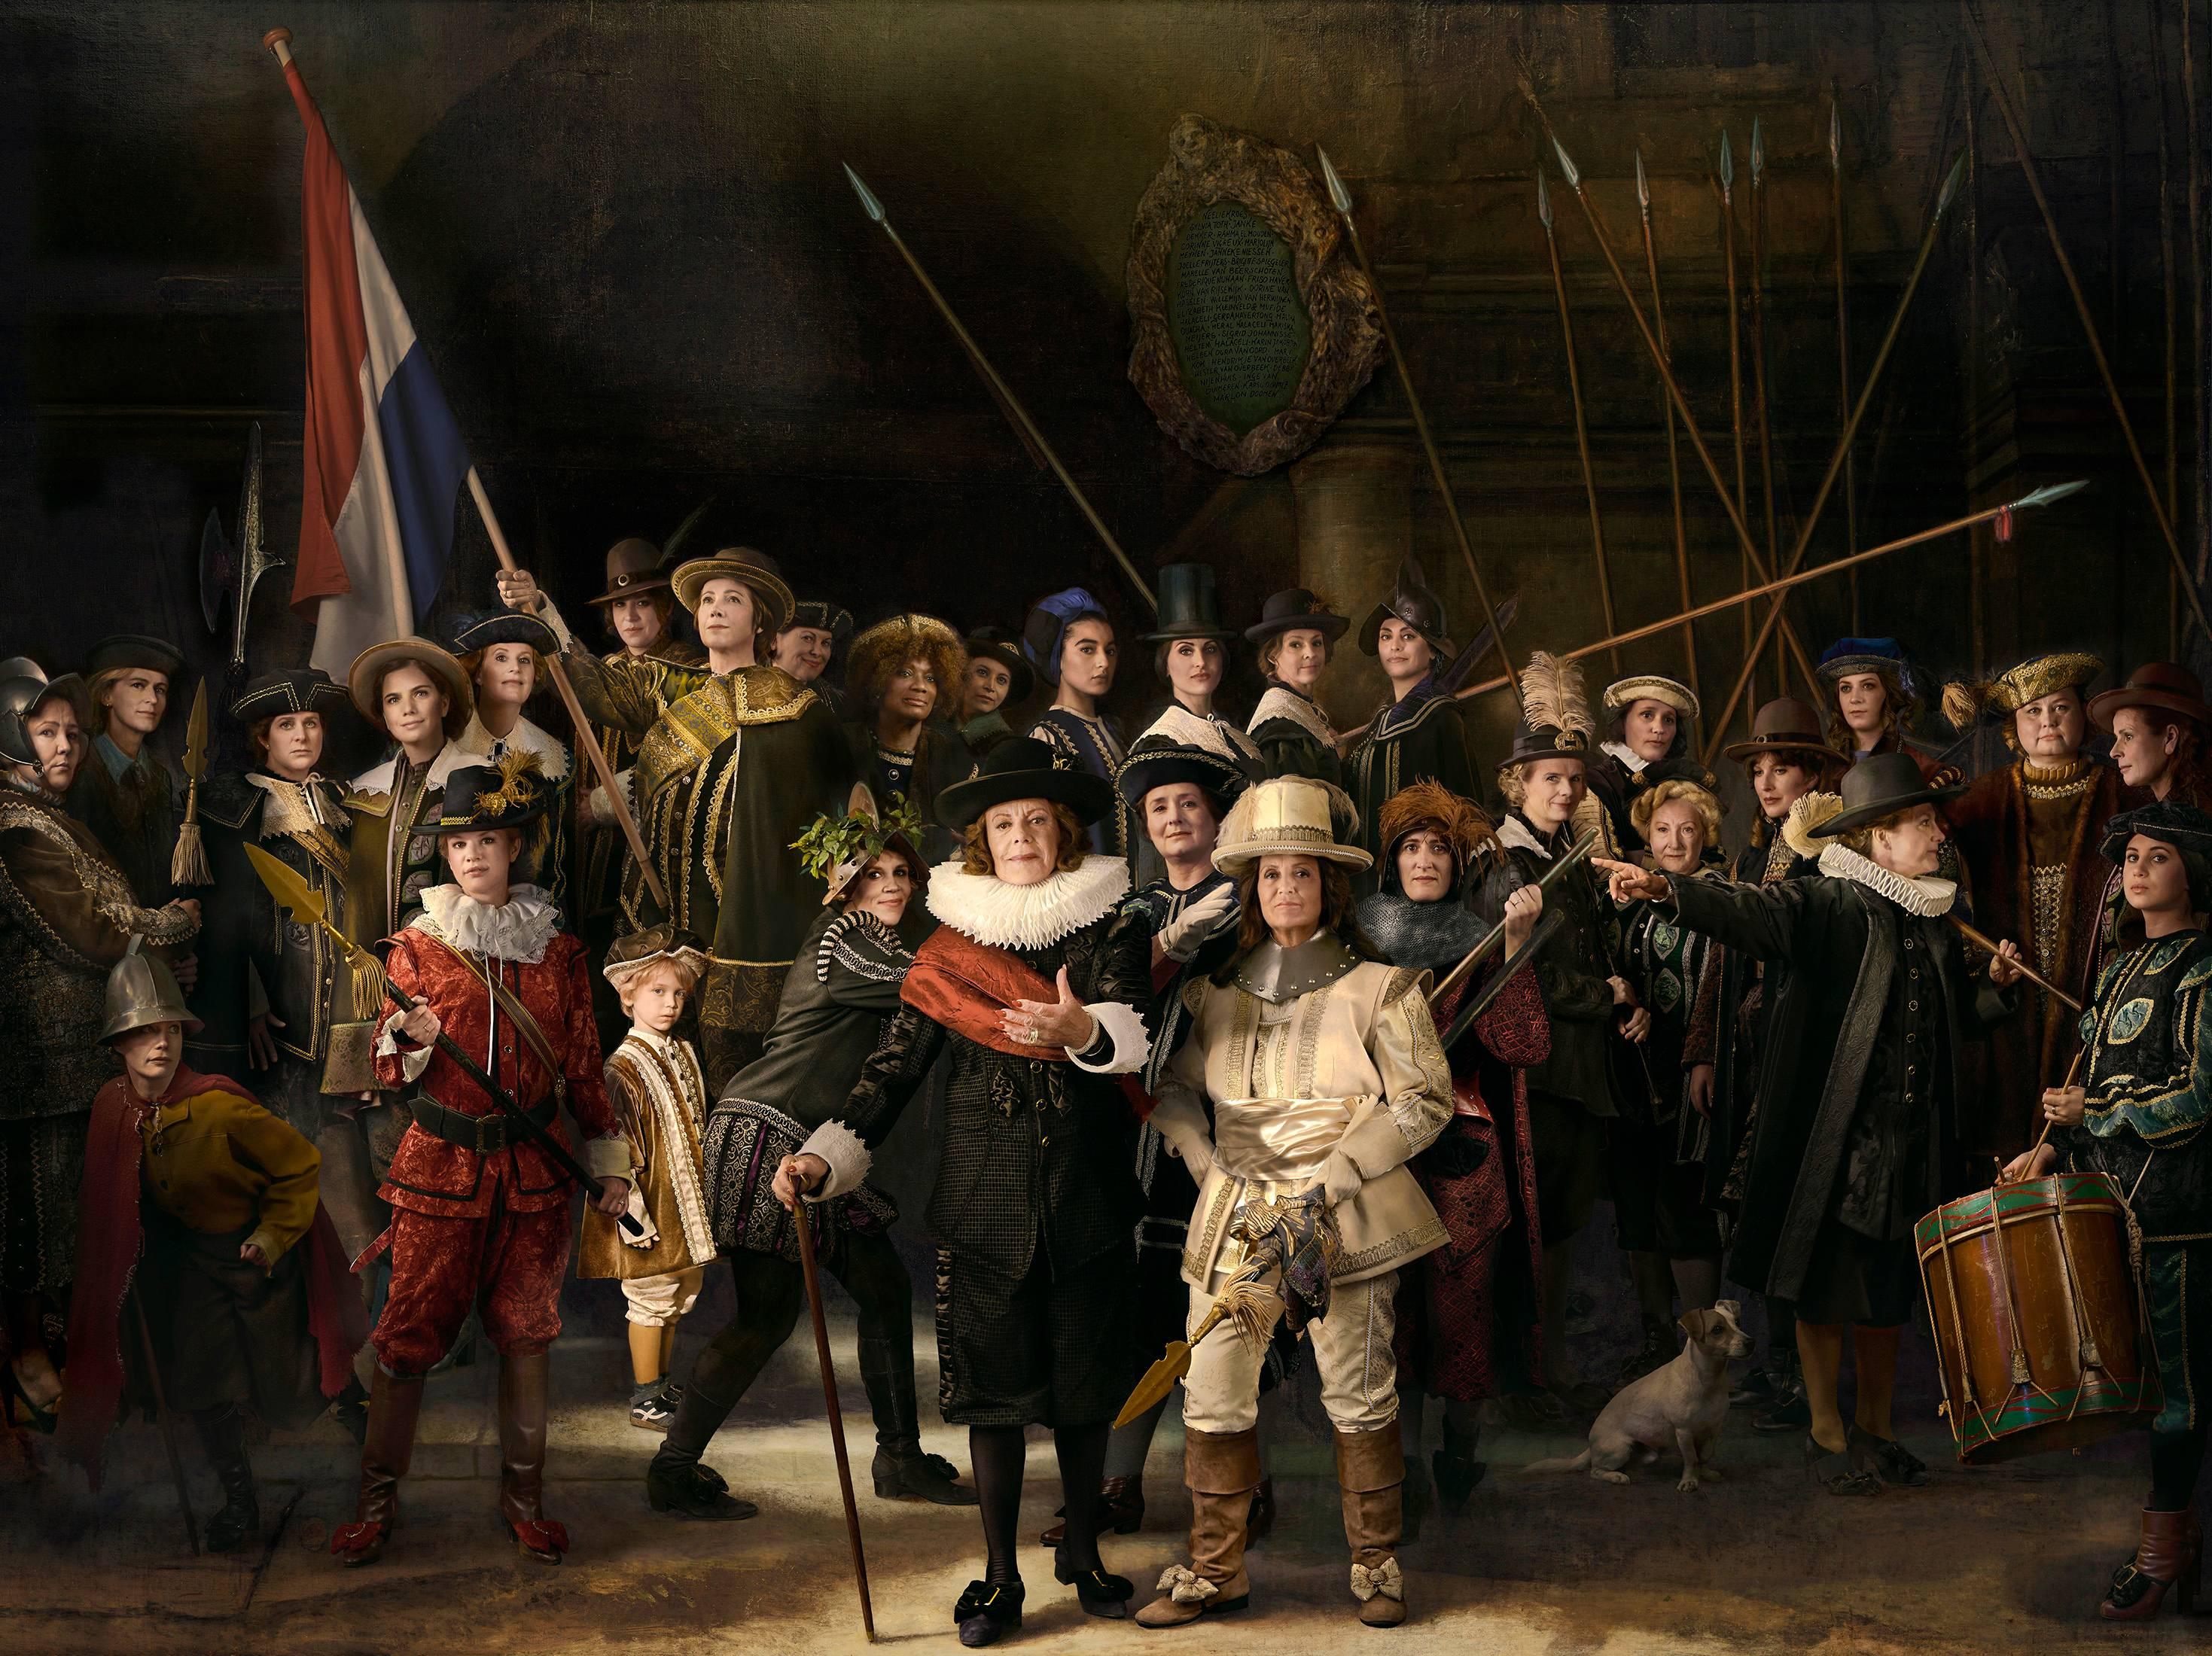 E2 - Kleinveld & Julien Figurative Photograph - Ode to Rembrandt's The Night Watch